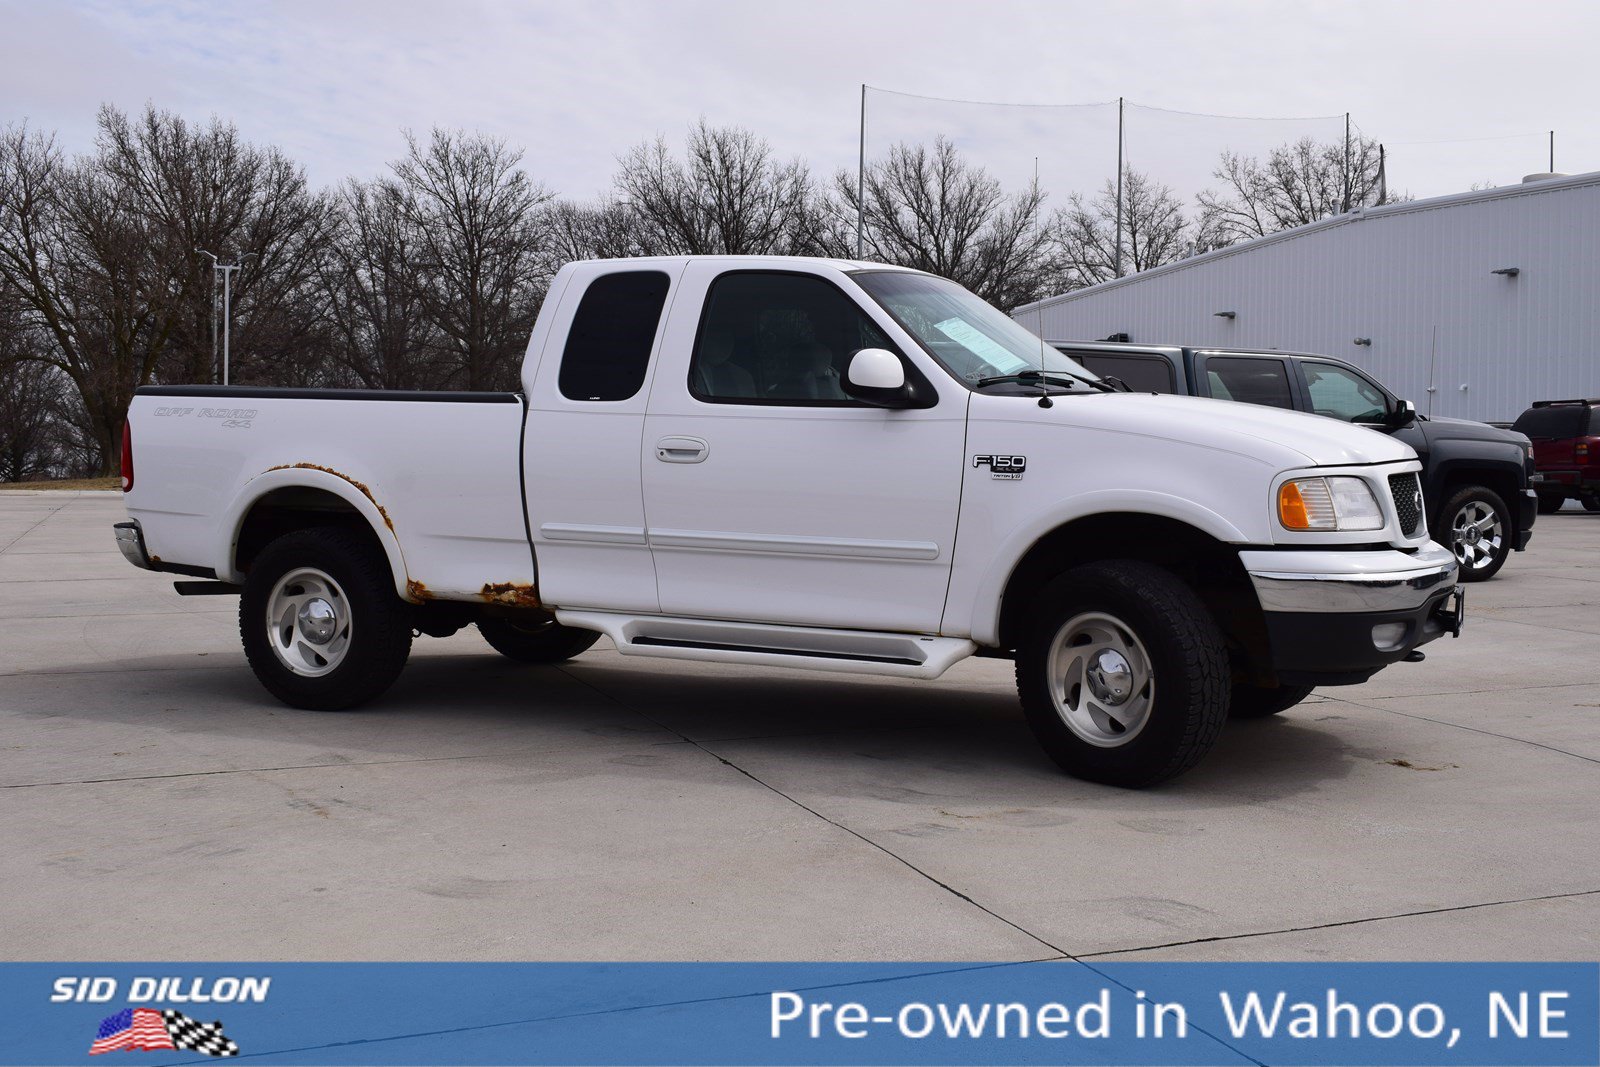 Pre-Owned 2001 Ford F-150 XLT 4WD Extended Cab 2001 Ford F150 Xlt Triton V8 Towing Capacity